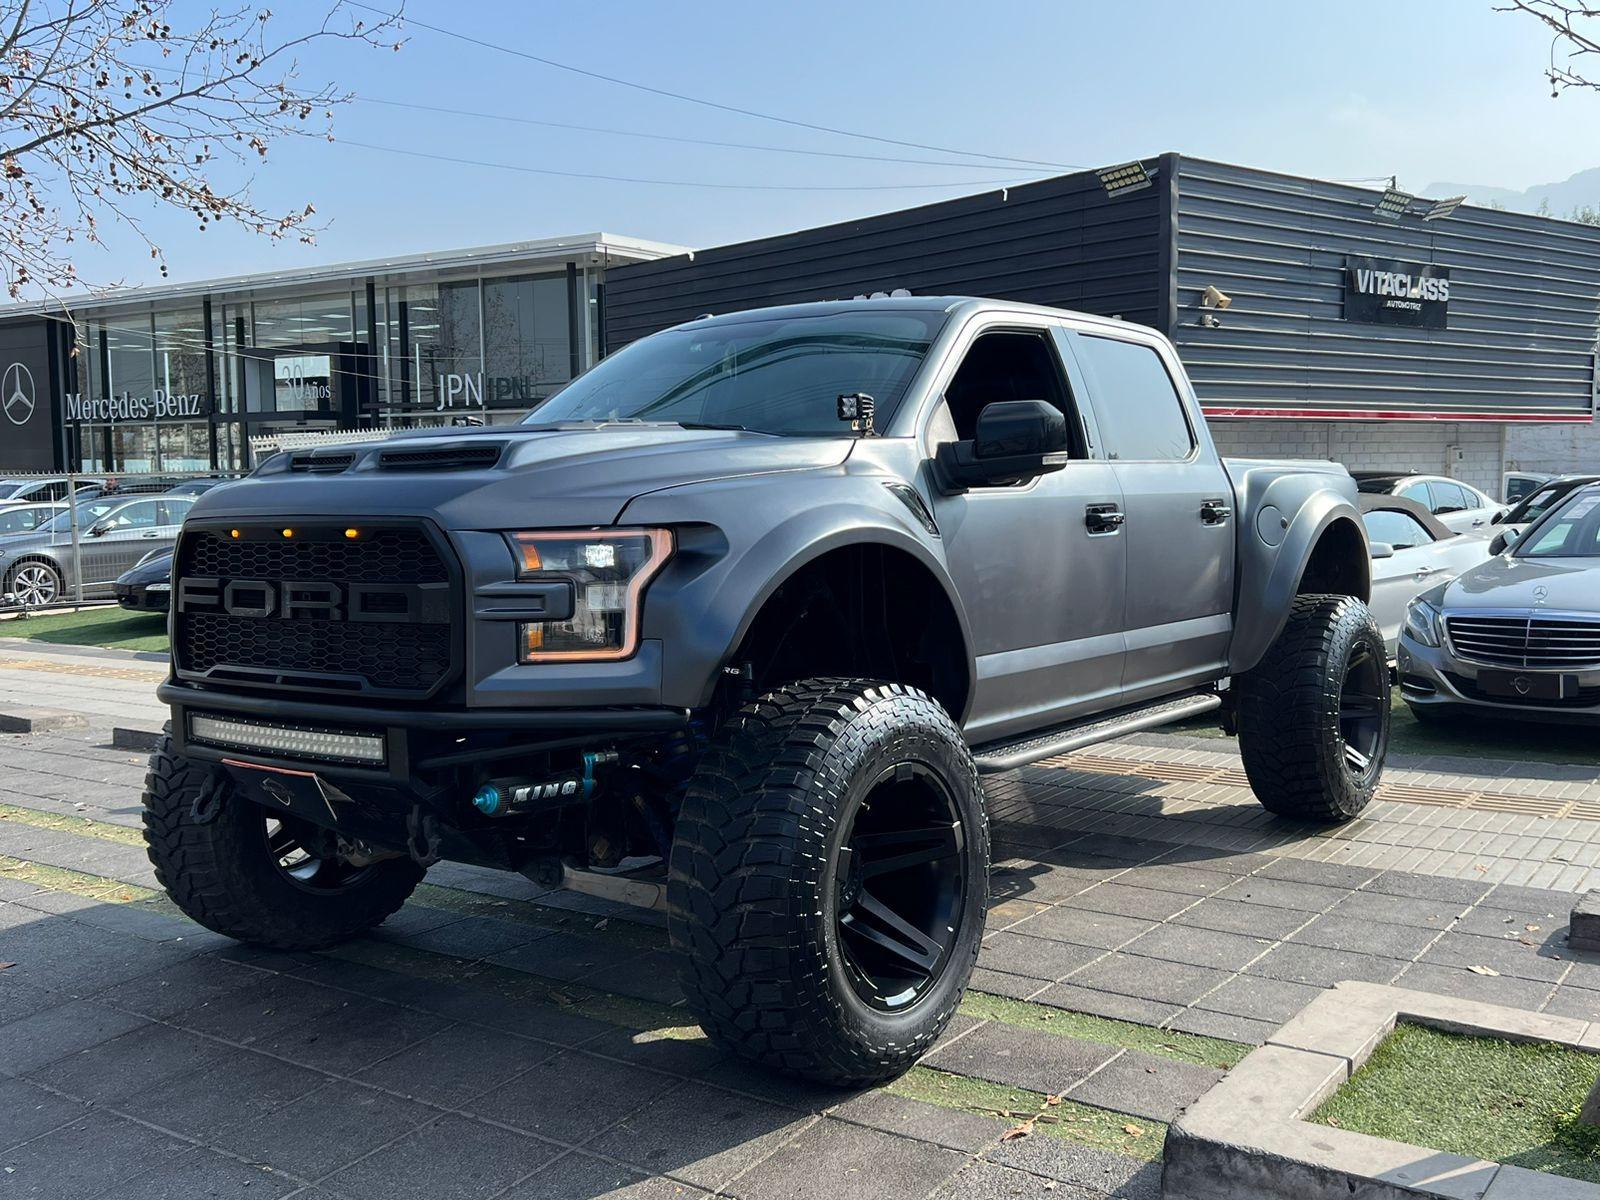 FORD F-150 LARIAT SPORT 5.0 2017 EQUIPO EXTRA BODY KIT RAPTOR - 